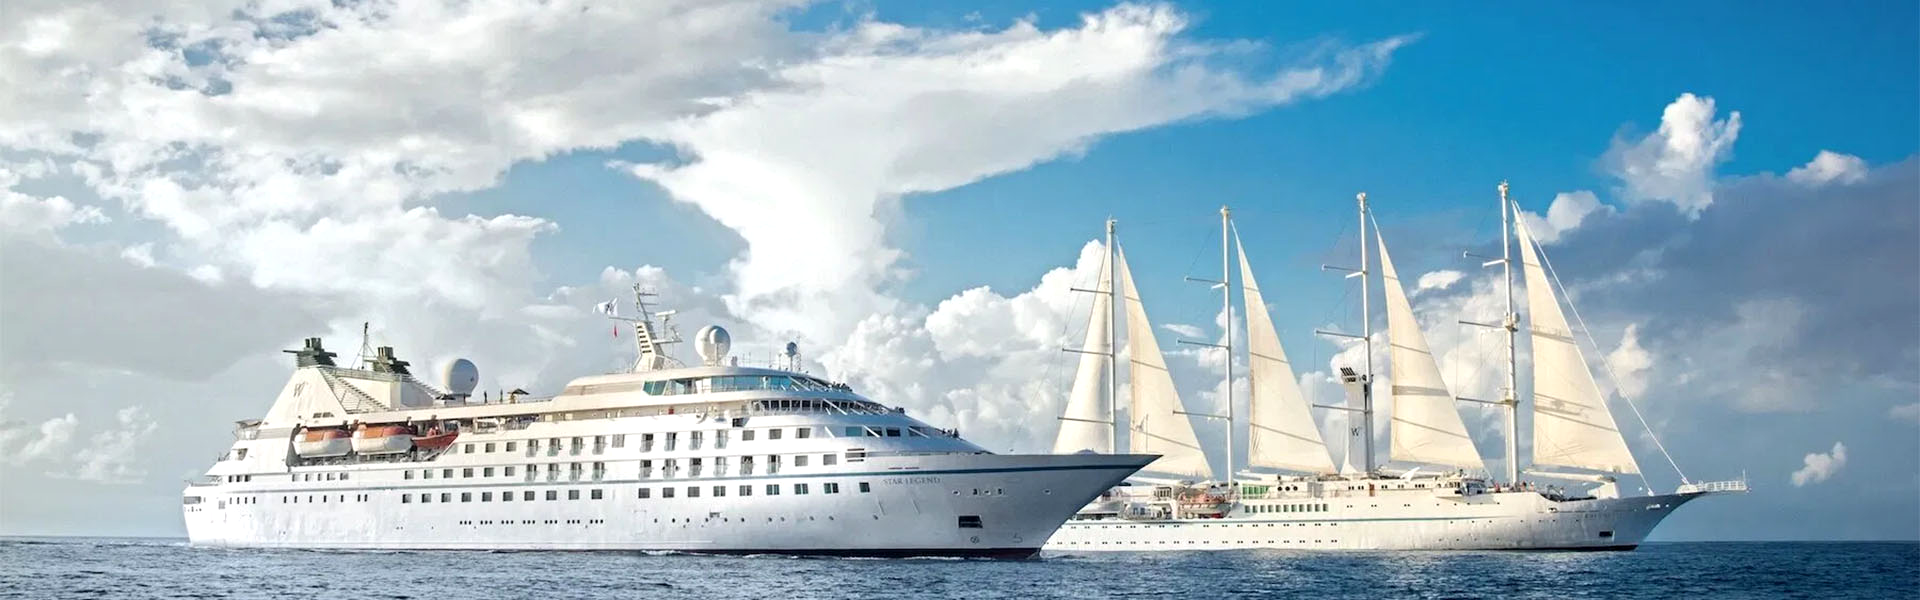 Luxury Cruises to the Mediterranean Sea on a Yacht